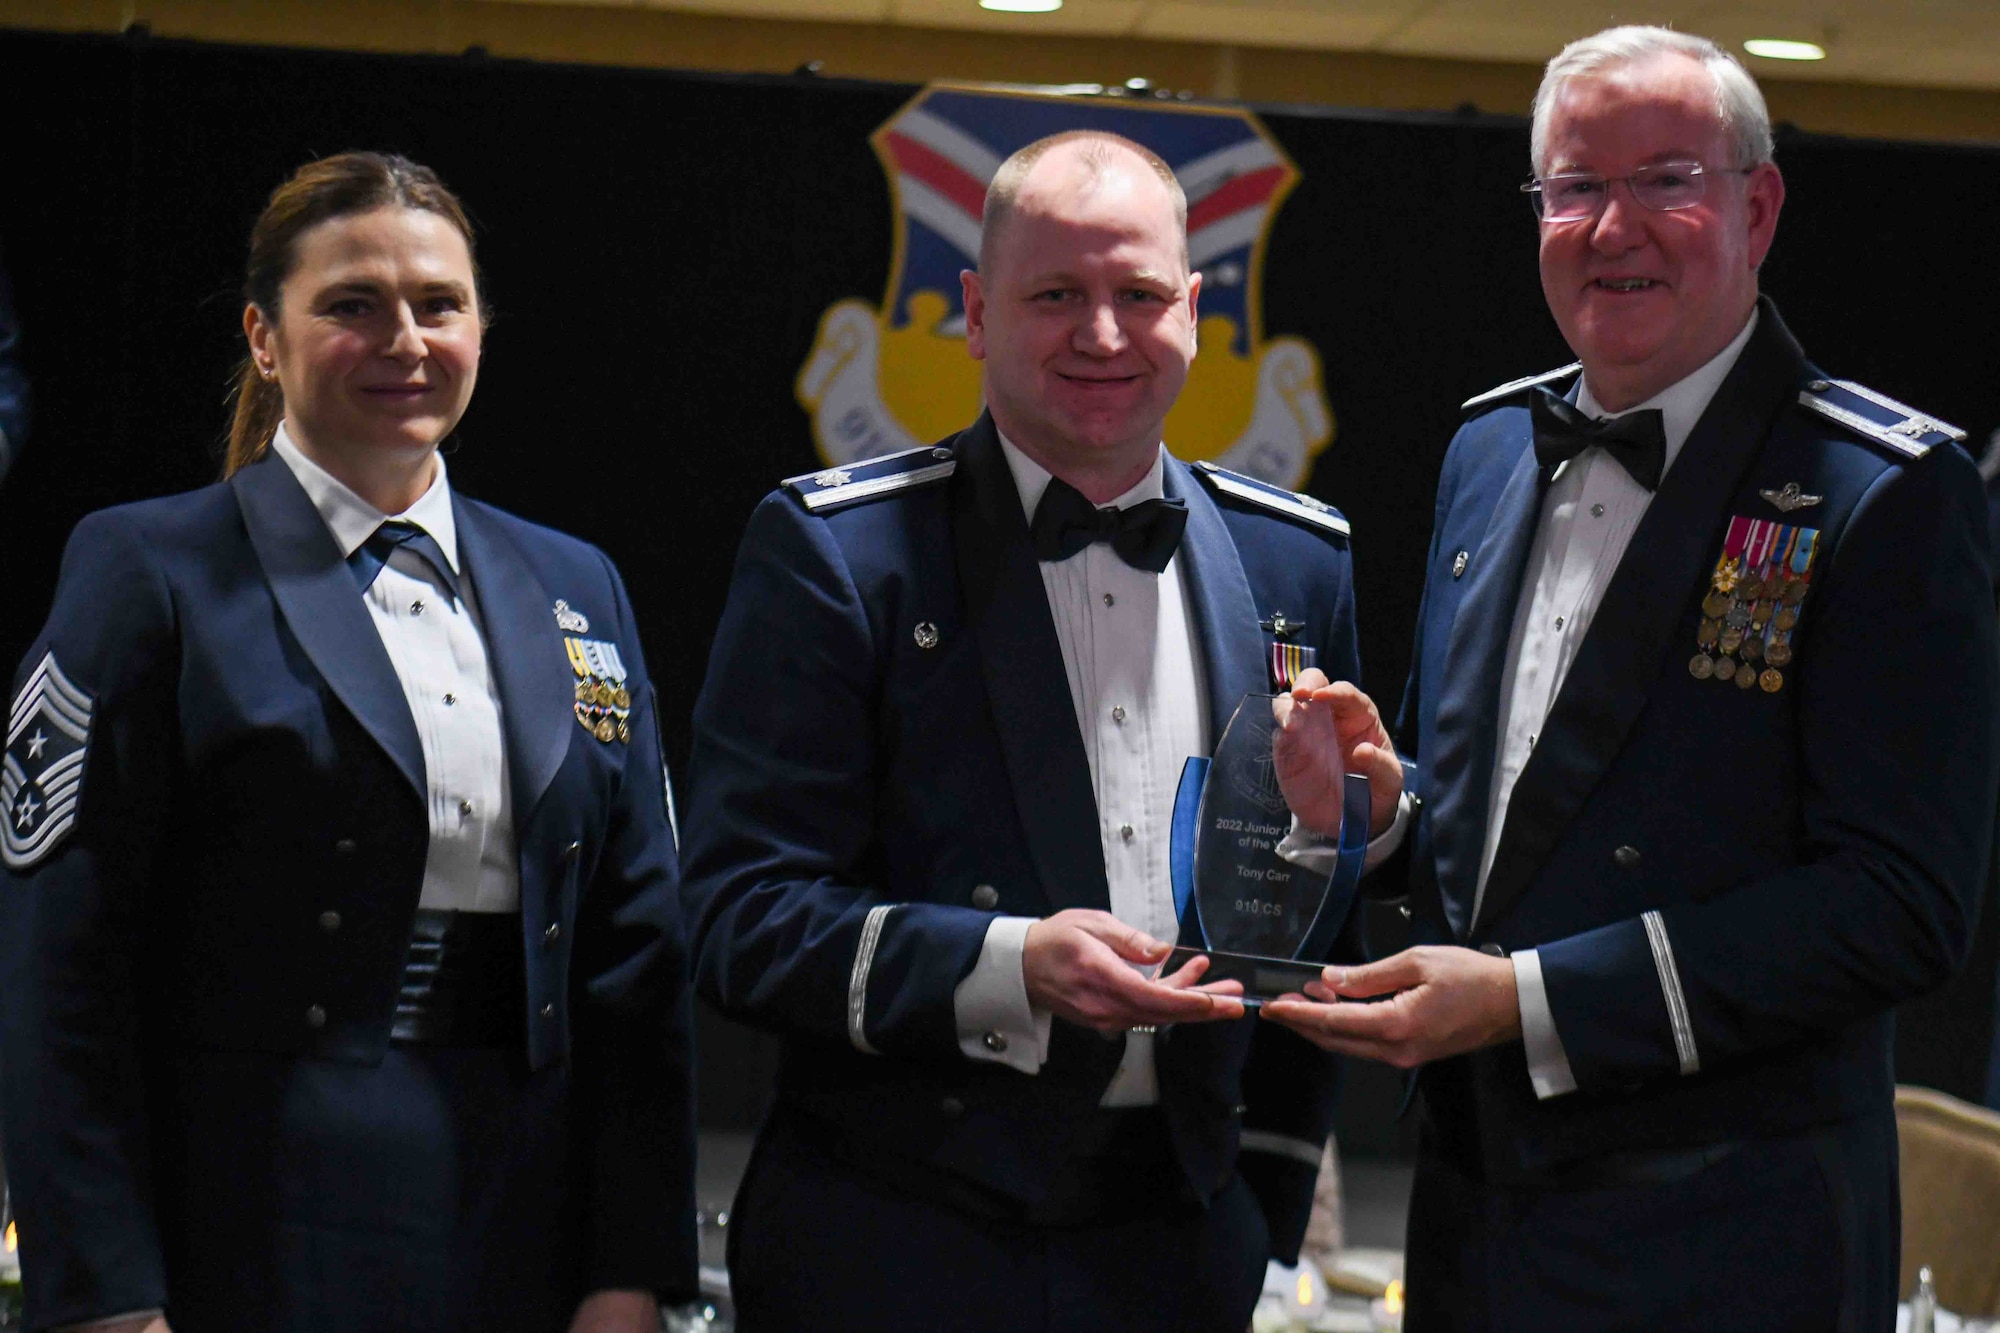 Lt. Col. Marc Meyer, 910th Communications Squadron commander, receives an award on behalf of Tony Carr, a management assistant with the 910th Communications Squadron, from 910th Airlift Wing Commander Col. Jeff Van Dootingh (right) and 910th AW Command Chief Master Sgt. Jennifer McKendree (left), during the unit’s annual awards banquet, March 4, 2023, at Youngstown Air Reserve Station, Ohio.